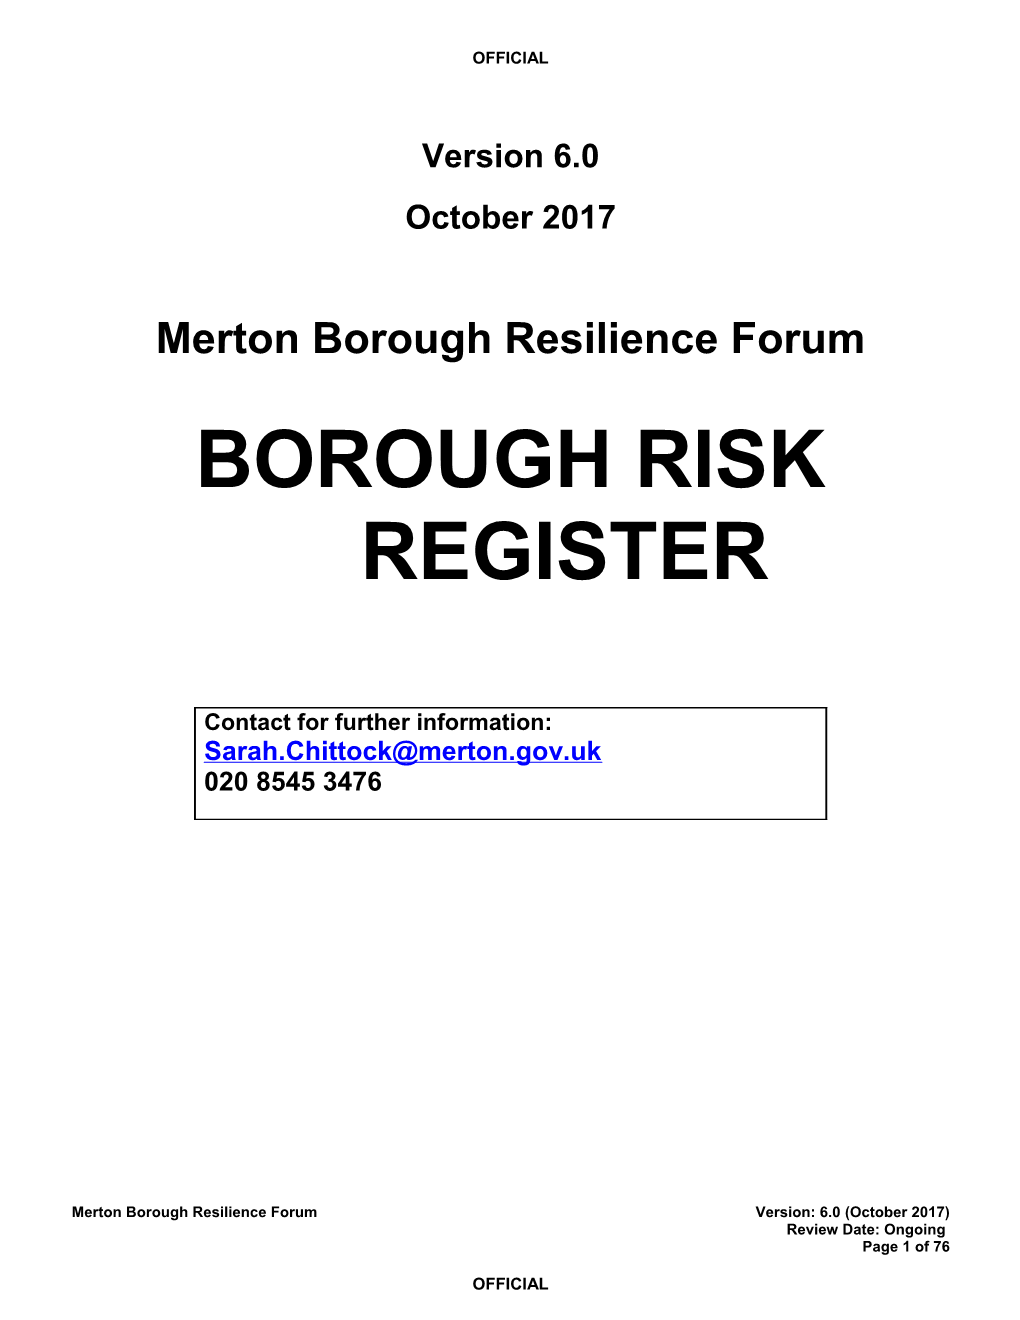 Avon and Somerset Local Resilience Forum